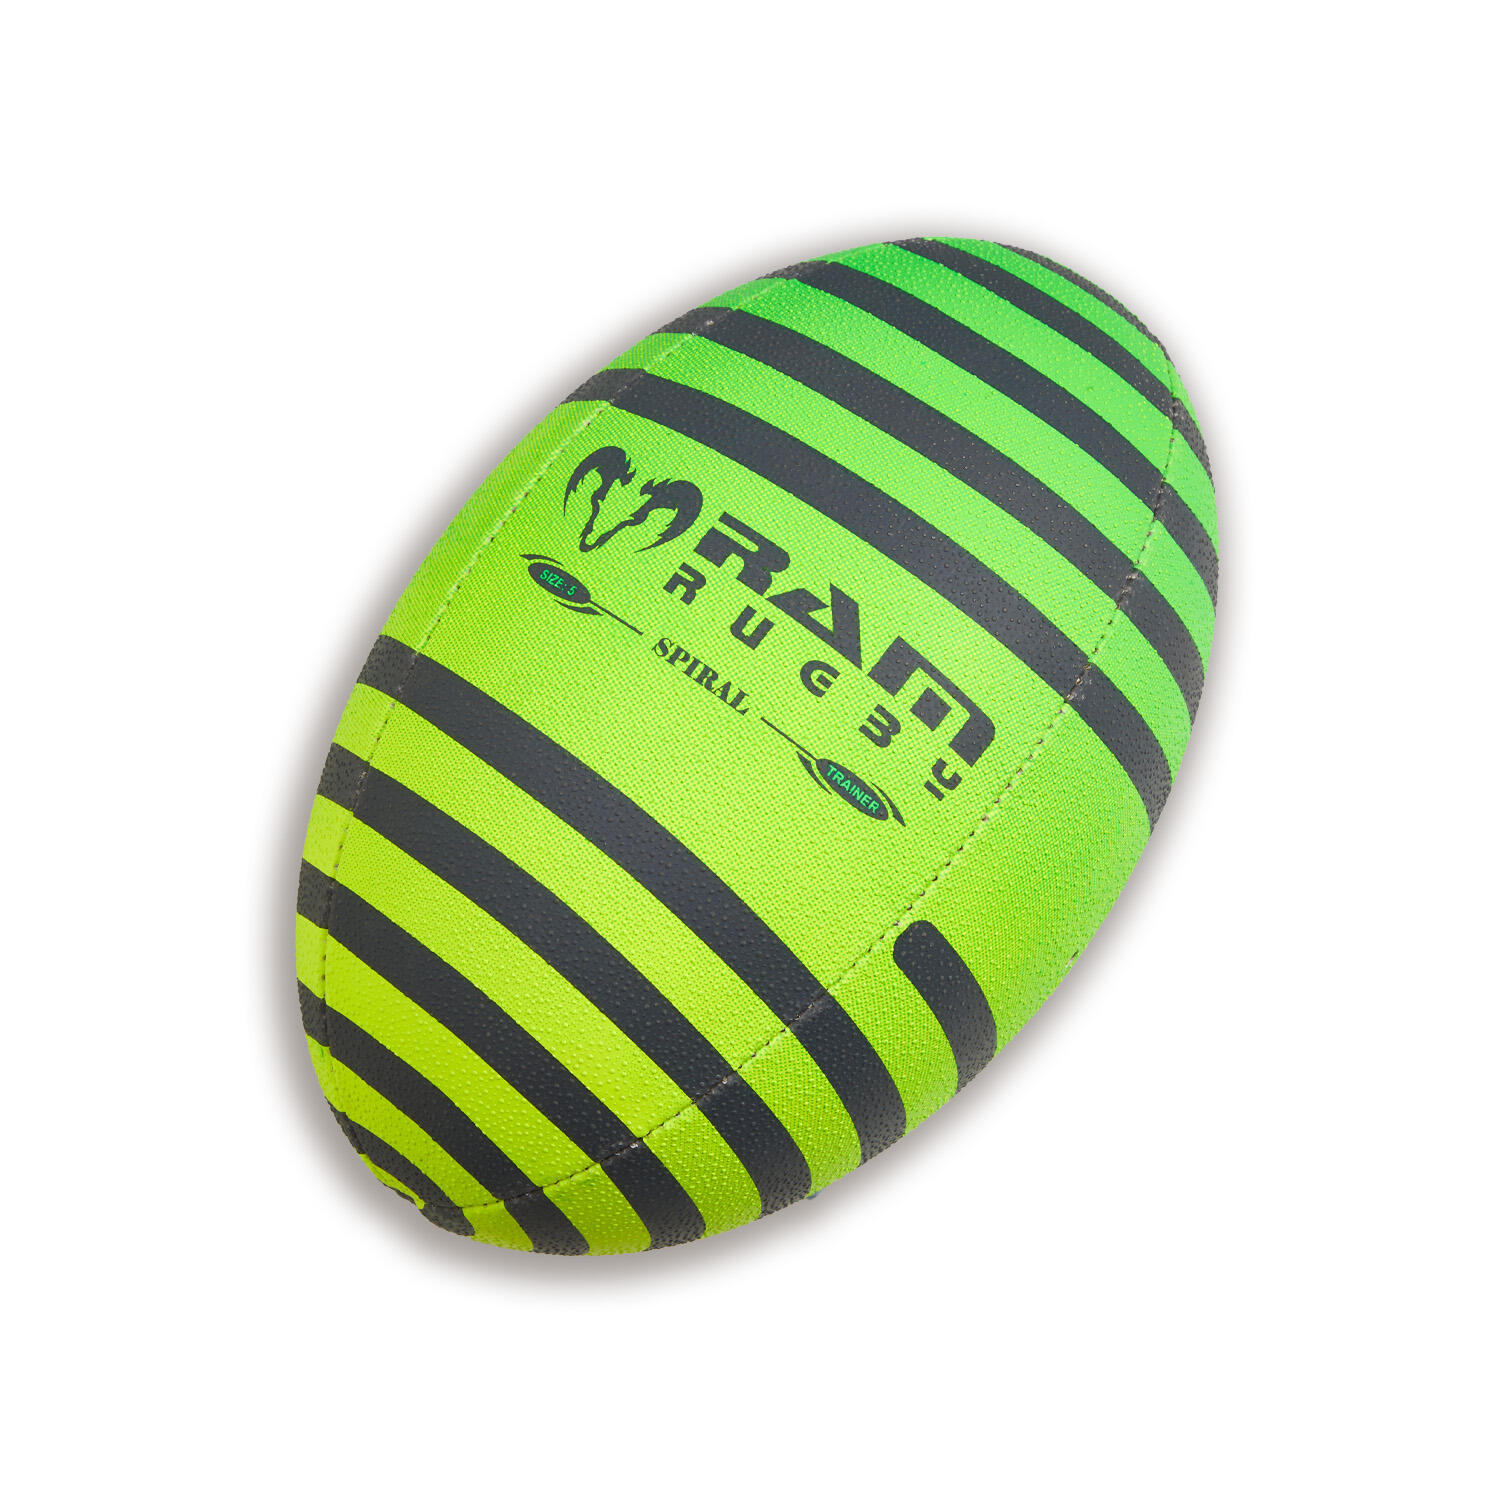 Ram Rugby Ball - Squad - Trainer - (Size Mini) - Spiral 3/6